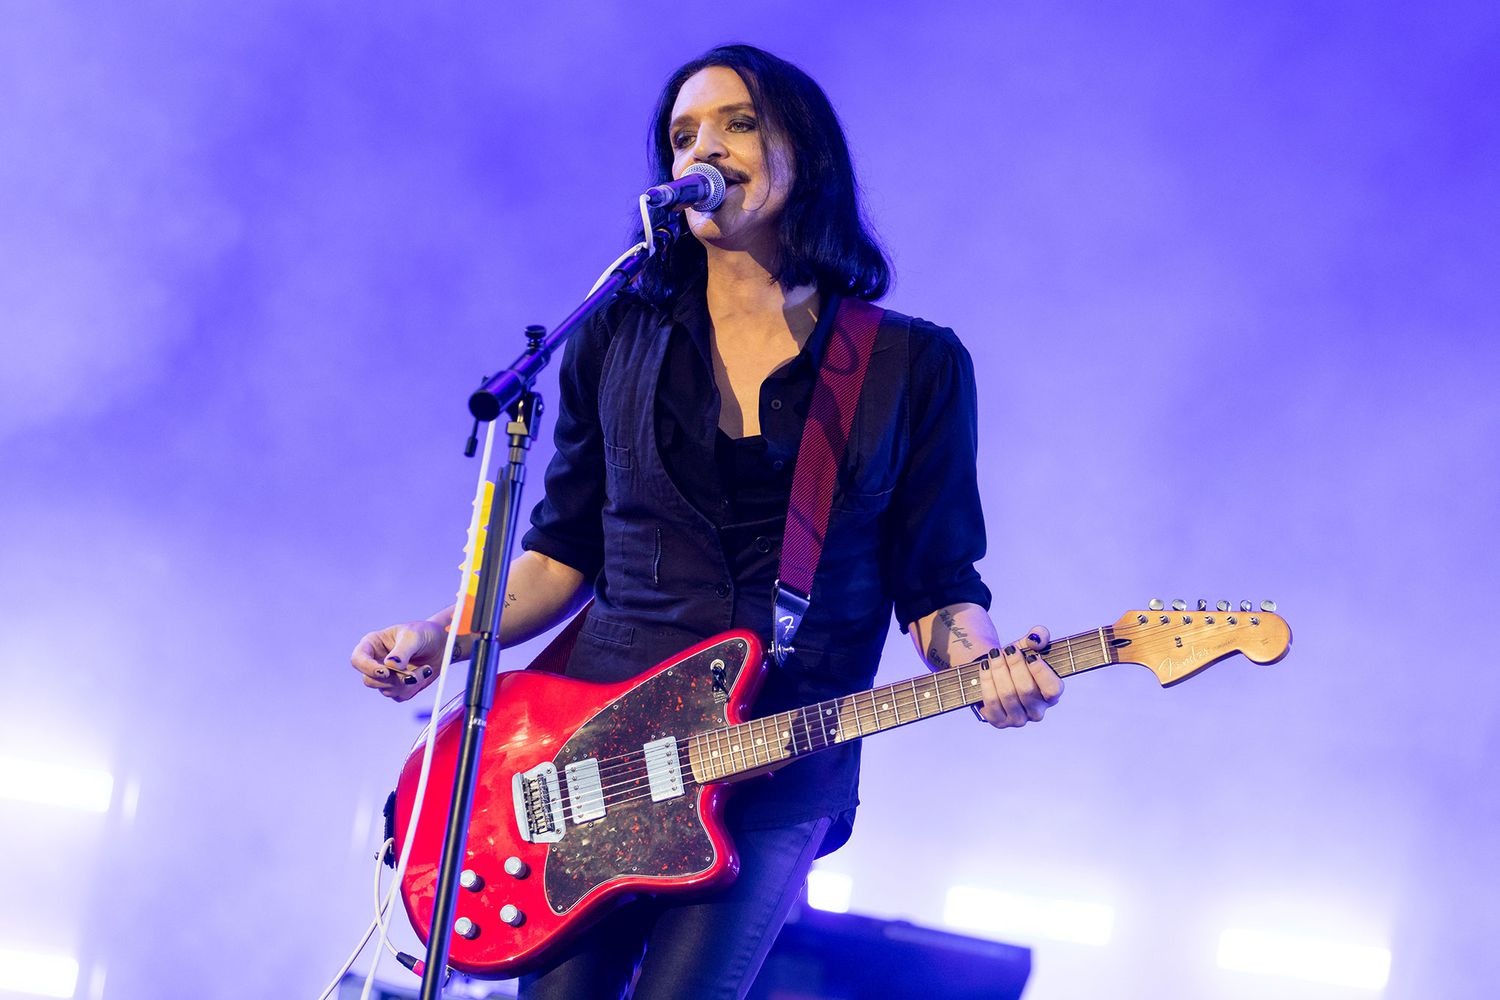 Frontman Brian Molko of the British band "Placebo" is on stage at the open-air festival "Rock im Park". It is one of the biggest music festivals in Bavaria. After a two-year break from the festival, around 75,000 music fans celebrated exuberantly at "Rock im Park".